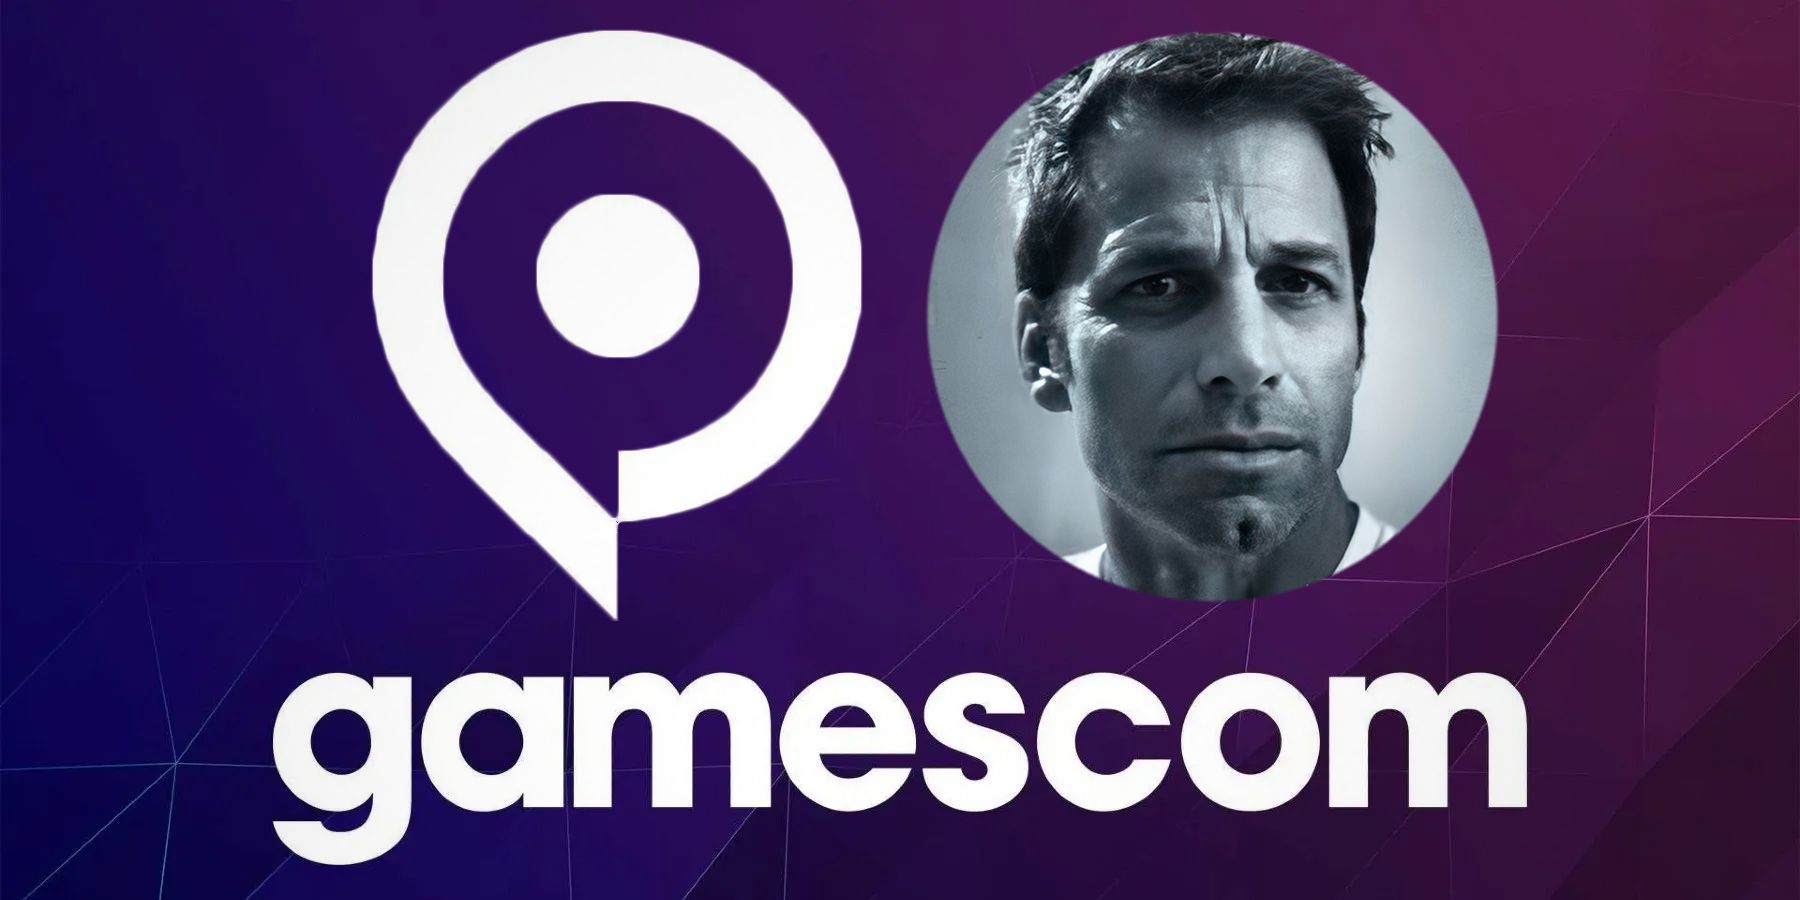 Gamescom 2023 graphic next to Zack Snyder Twitter profile picture